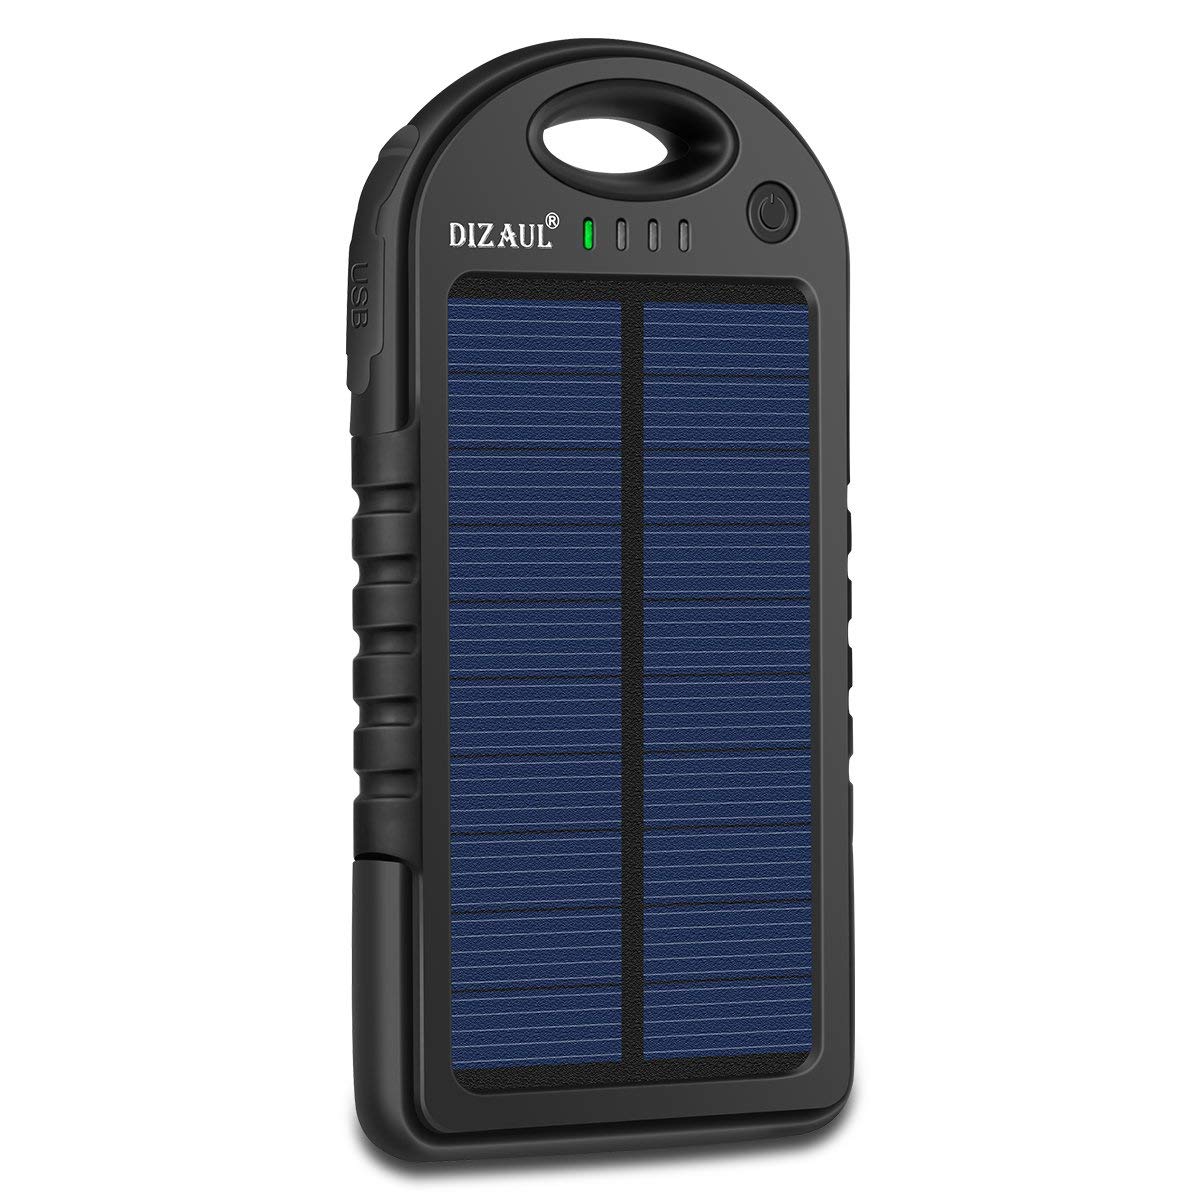 Solar Charger, Dizaul 5000mAh Portable Solar Power Bank Waterproof/Shockproof/Dustproof Dual USB Battery Bank for cell phone,iPhone, Samsung, Android phones, Windows phones, GoPro Camera, GPS and More